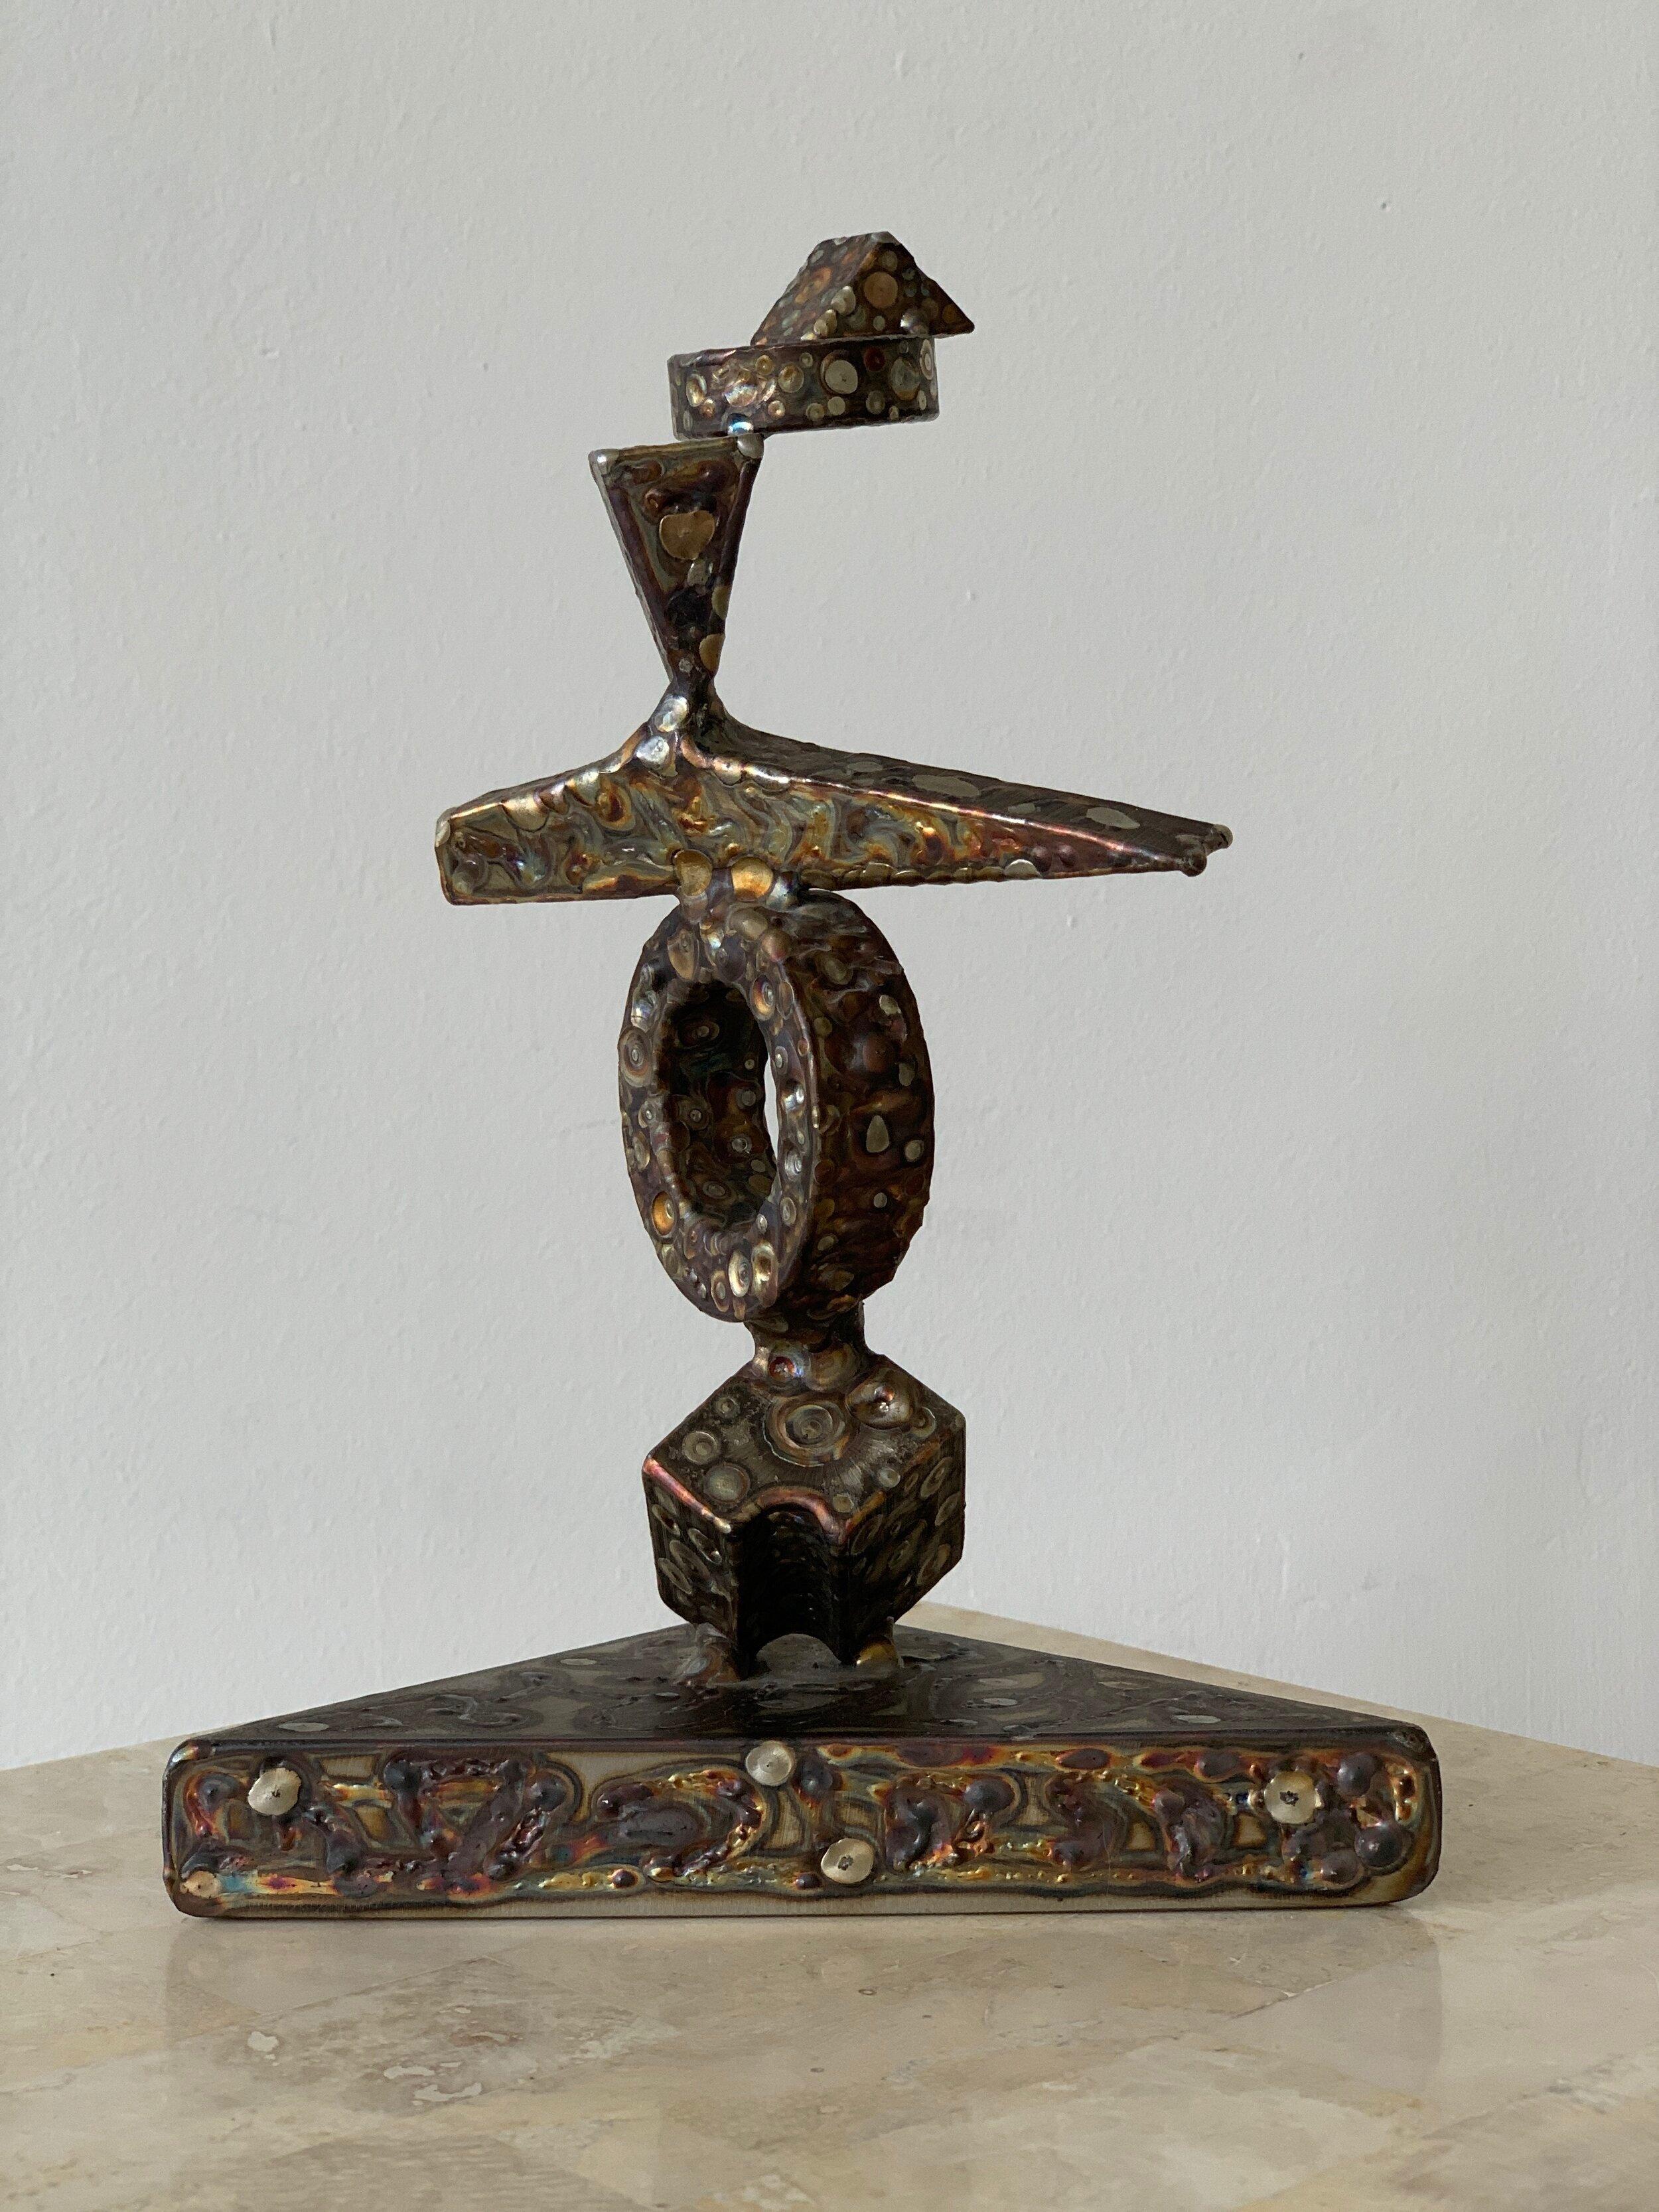 Extremely rare work by renowned Chicago modern artist, George Kafka, circa 1973. The Totem structure is formed through welded, stacked abstract shapes creating a figural image with a torch textured surface in coppery brass tones. Signed + dated by